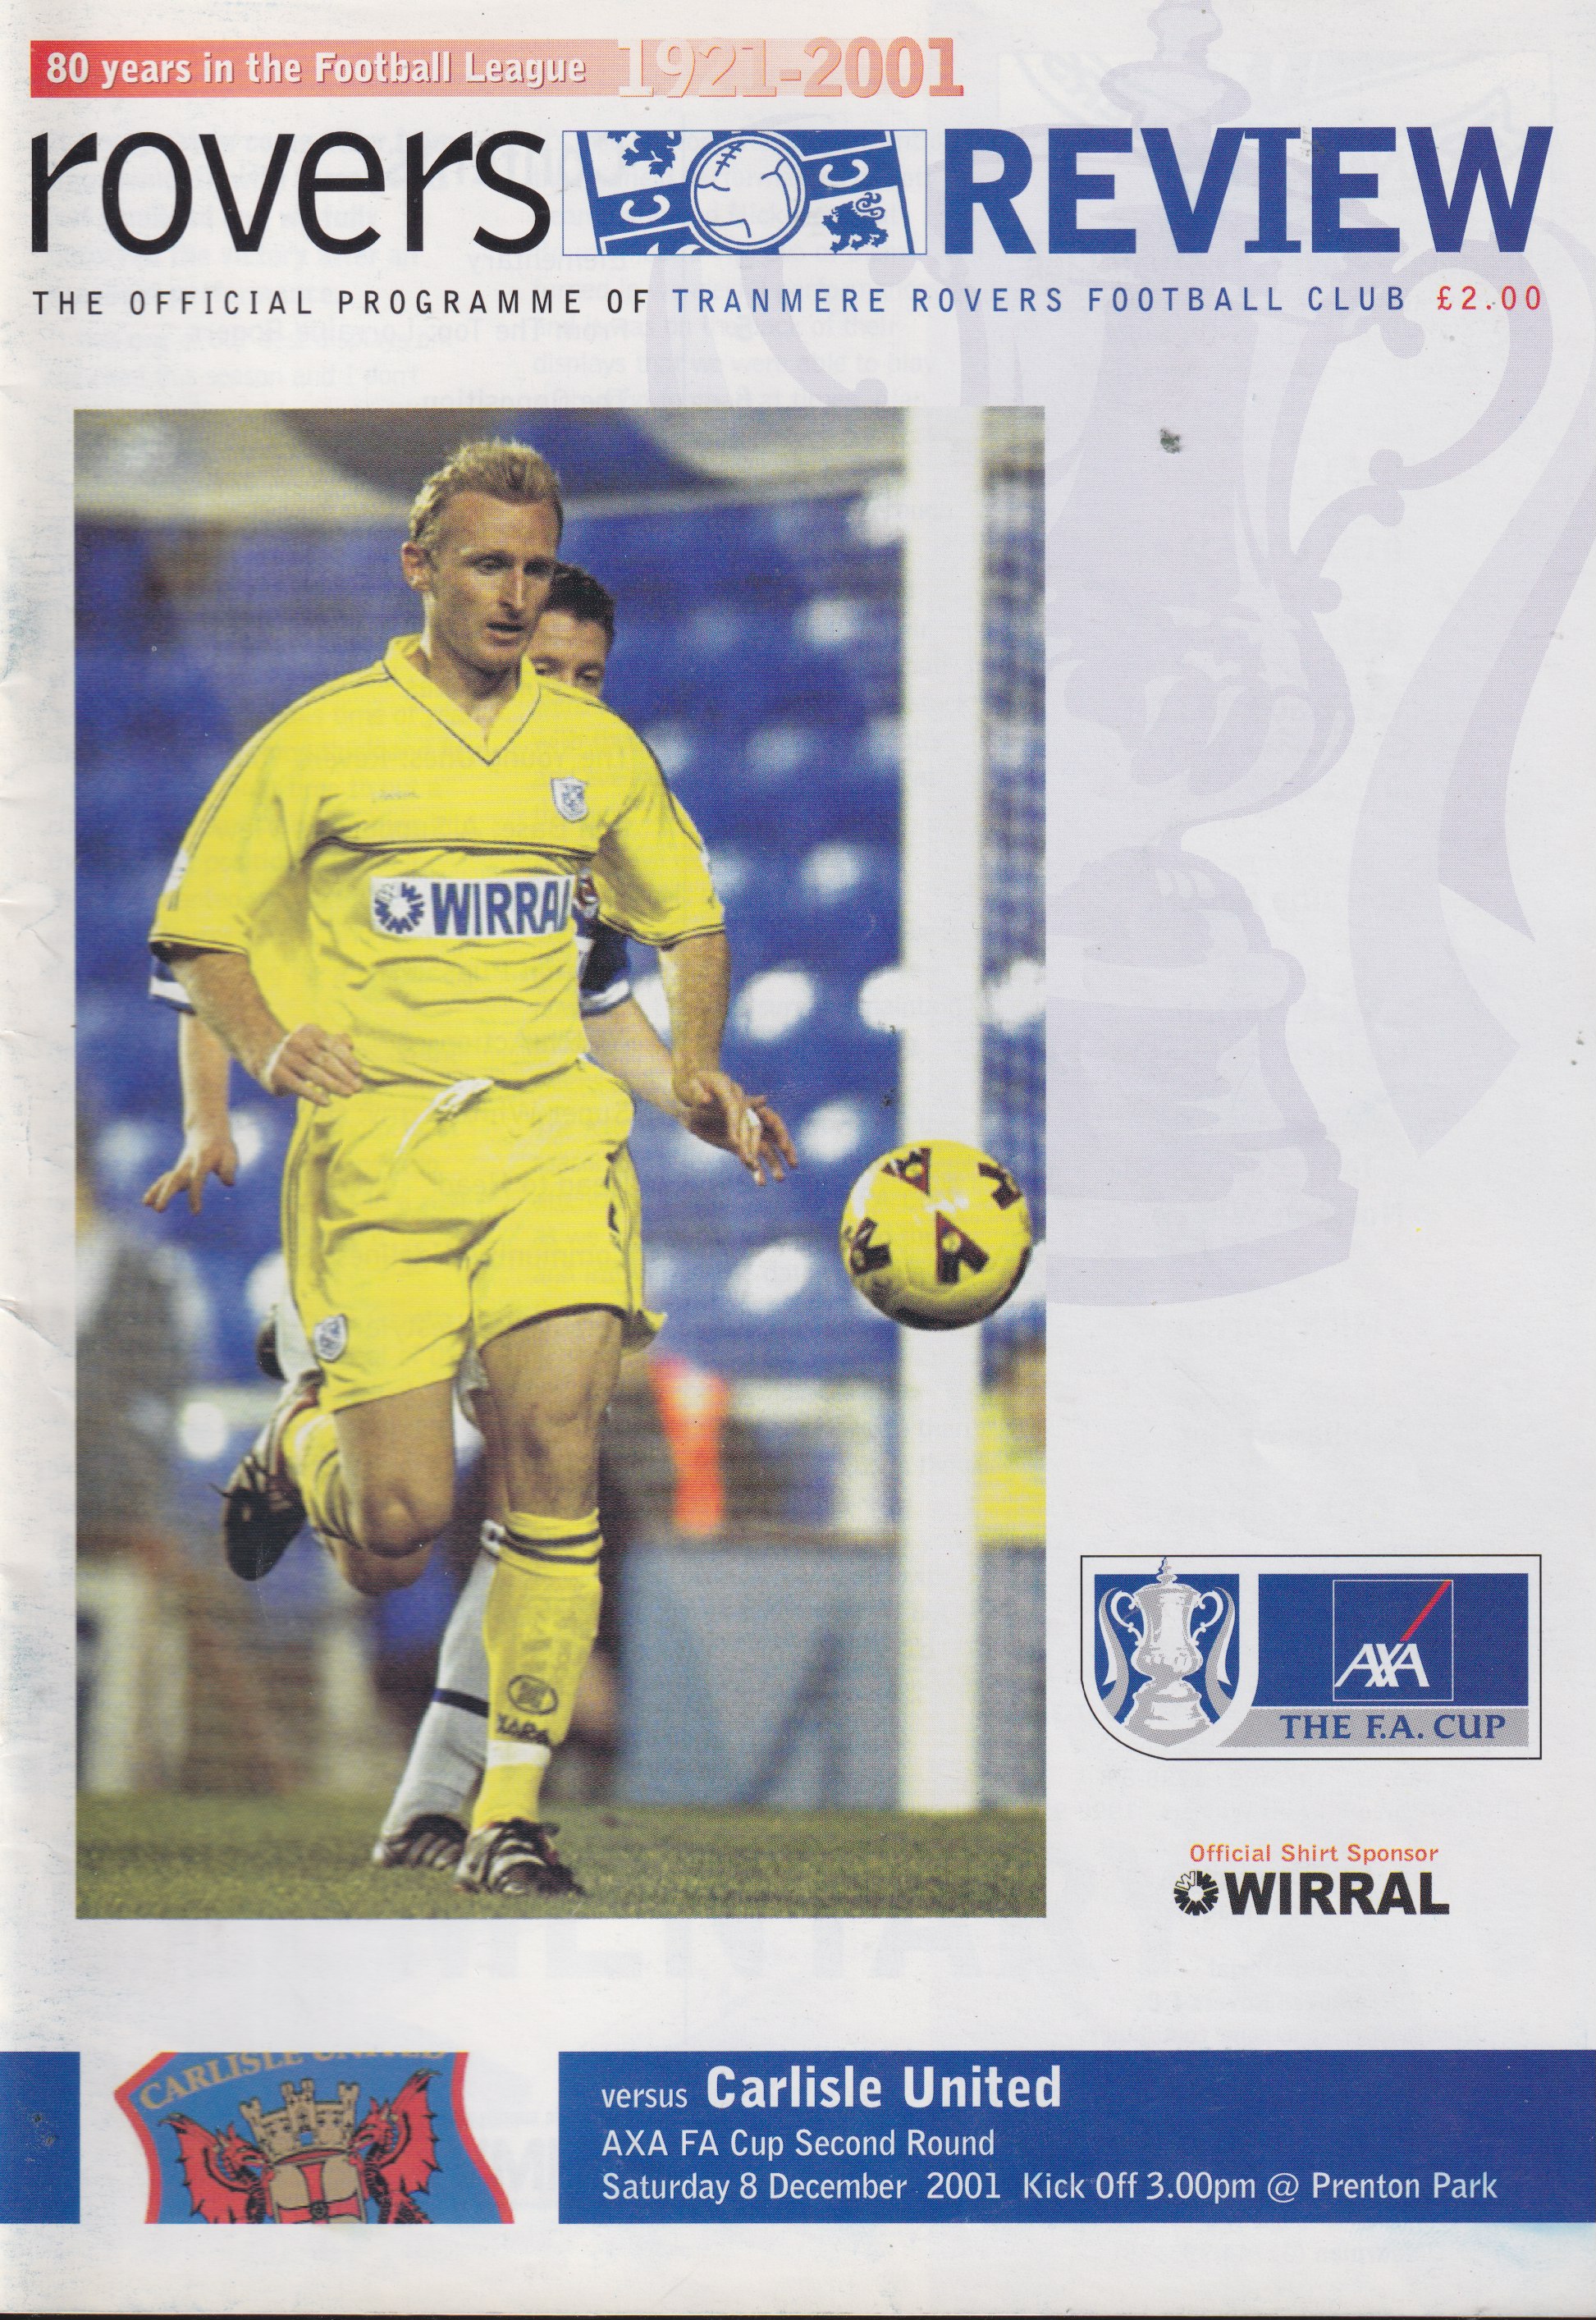 Match Programme For {home}} 6-1 Carlisle United, FA Cup, 2001-12-08